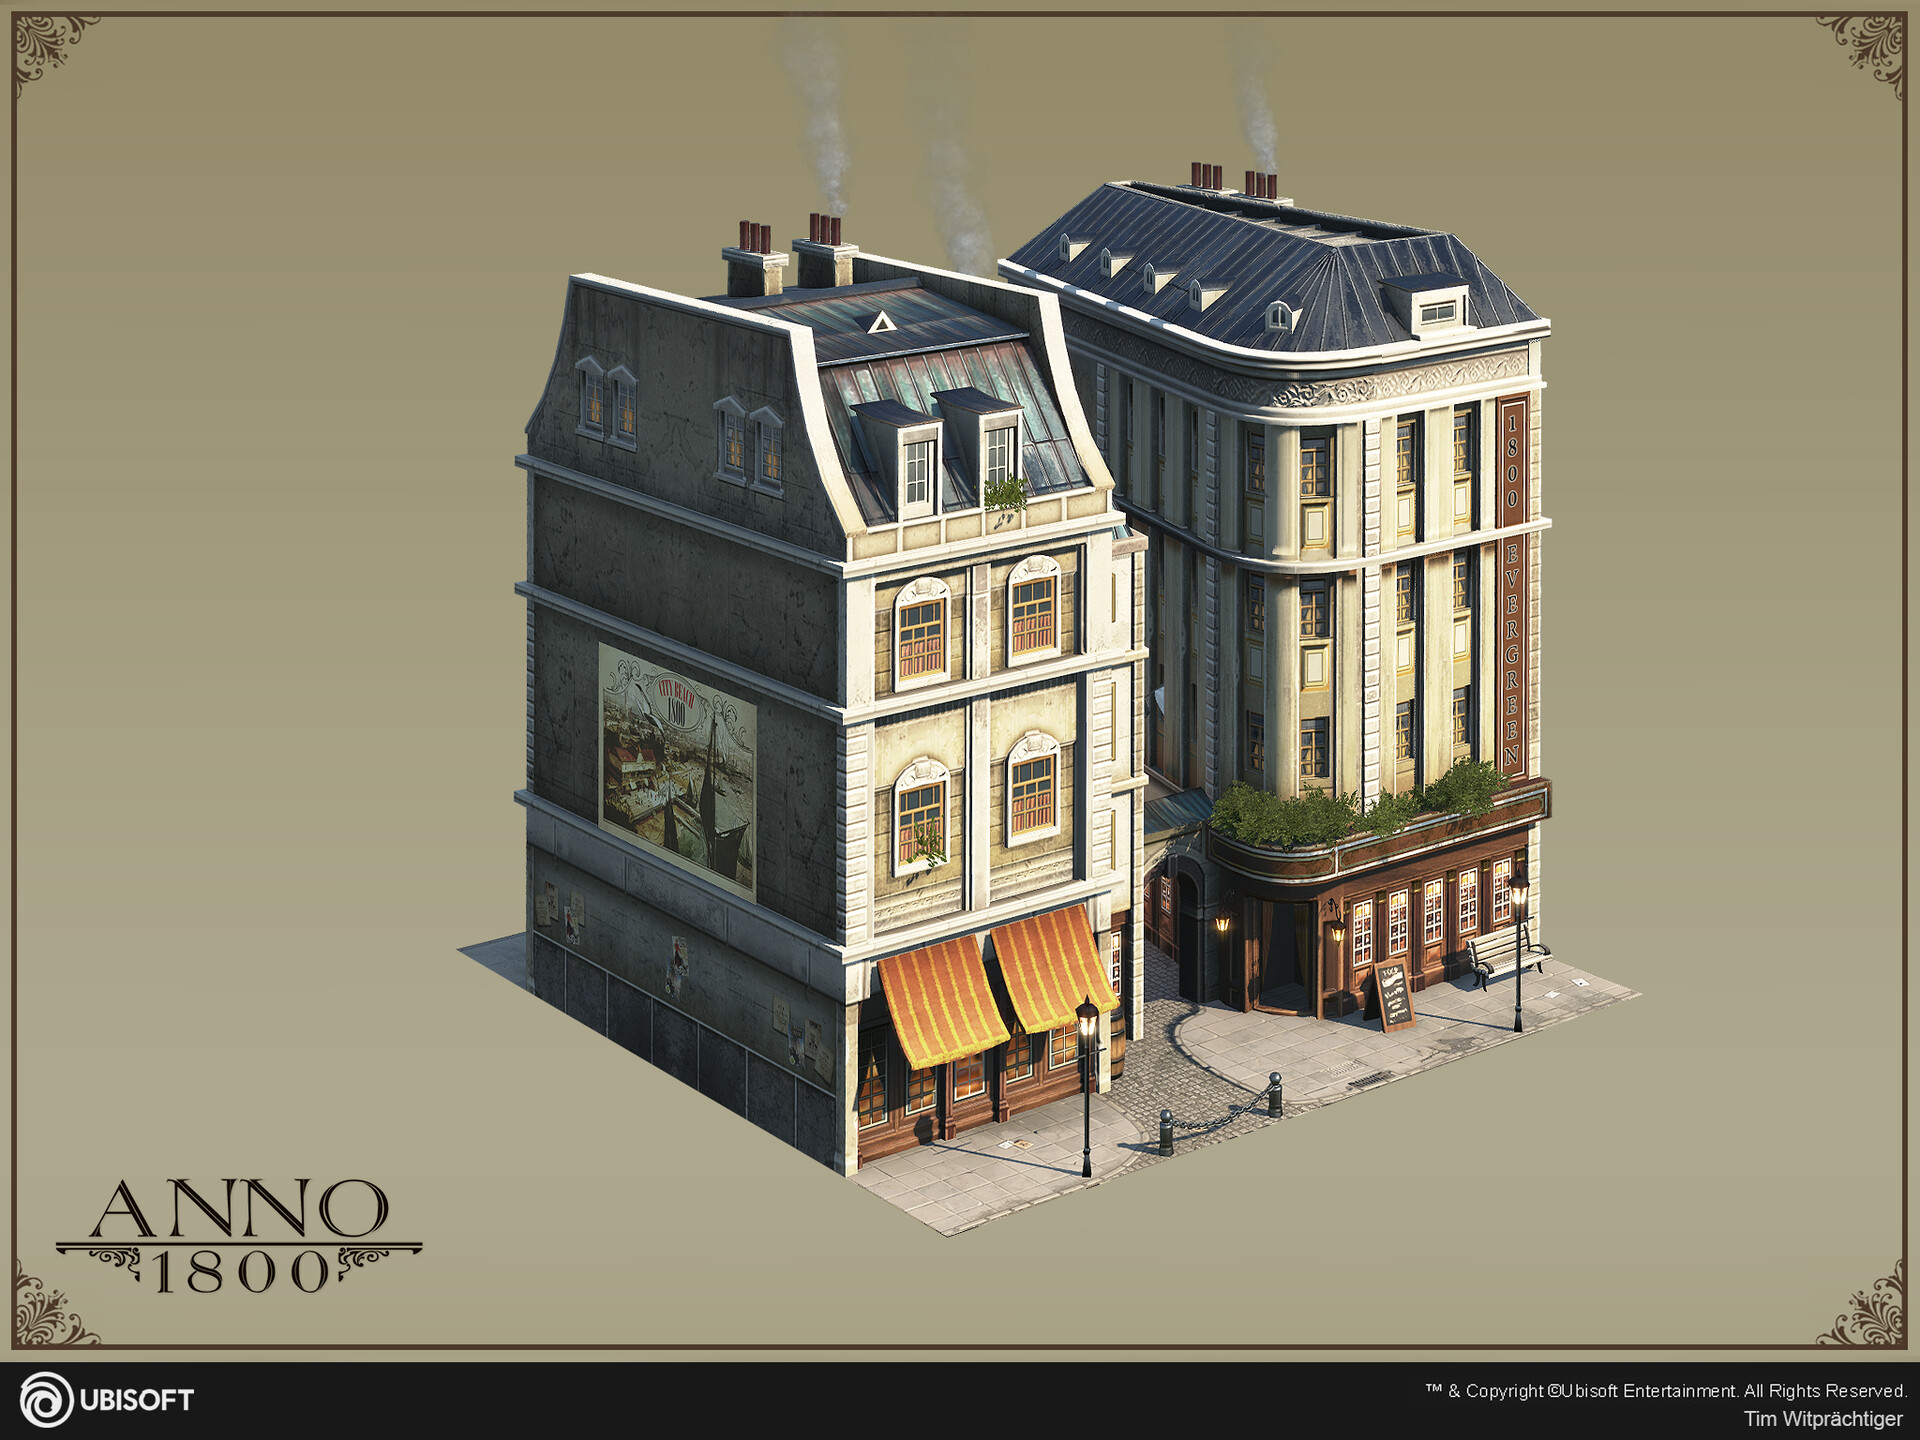 Anno 1800 Residence Building